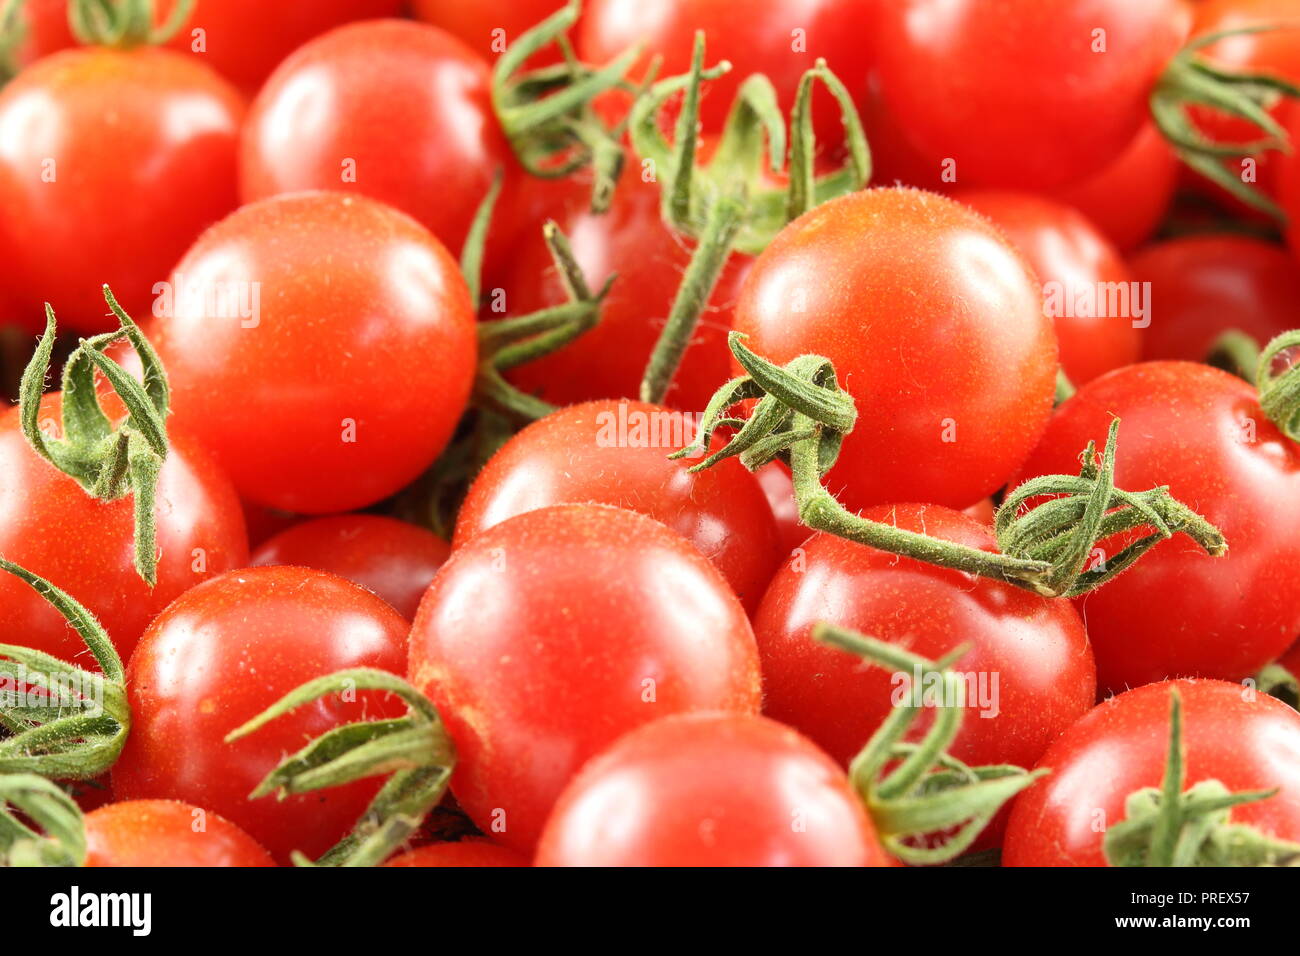 fresh wild currant tomatoes in closeup view Stock Photo